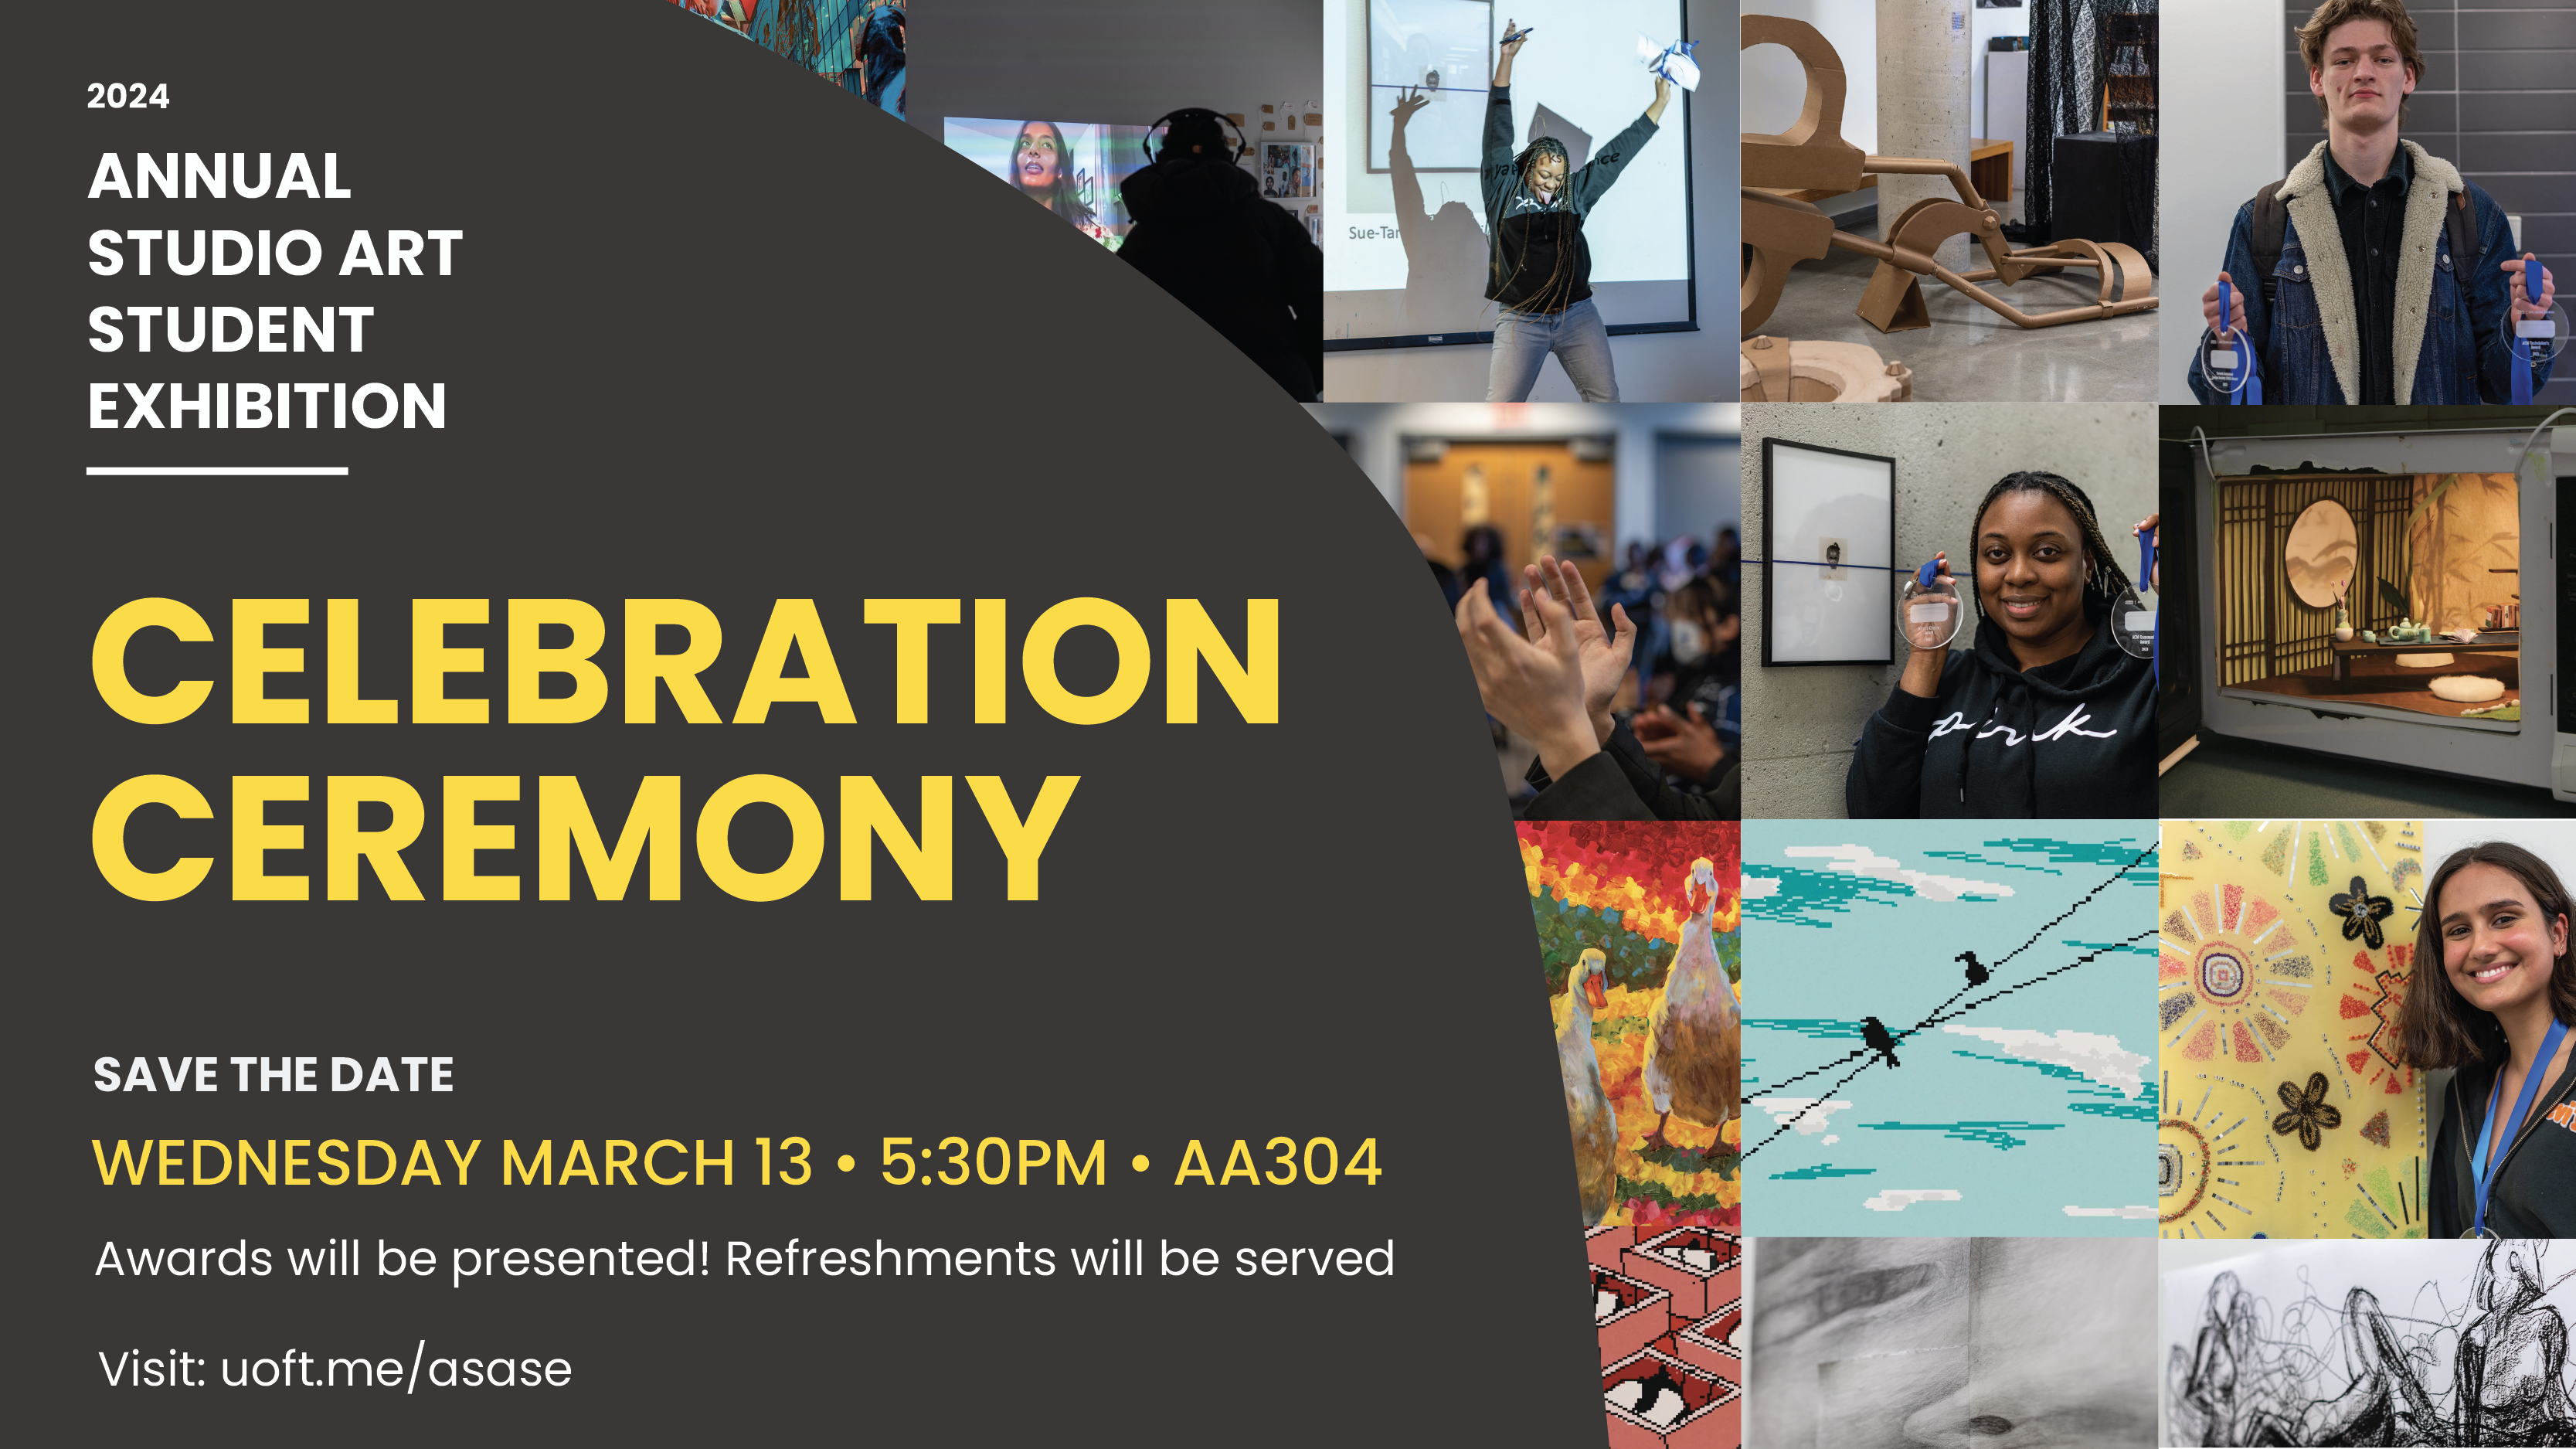 Celebration Ceremony in yellow text over dark grey background. Happening on March 13, 2024 at 5:30pm in room AA304. Awards will be presented. Learn more on uoft.me/asase. On the right side with student artworks from 2023.